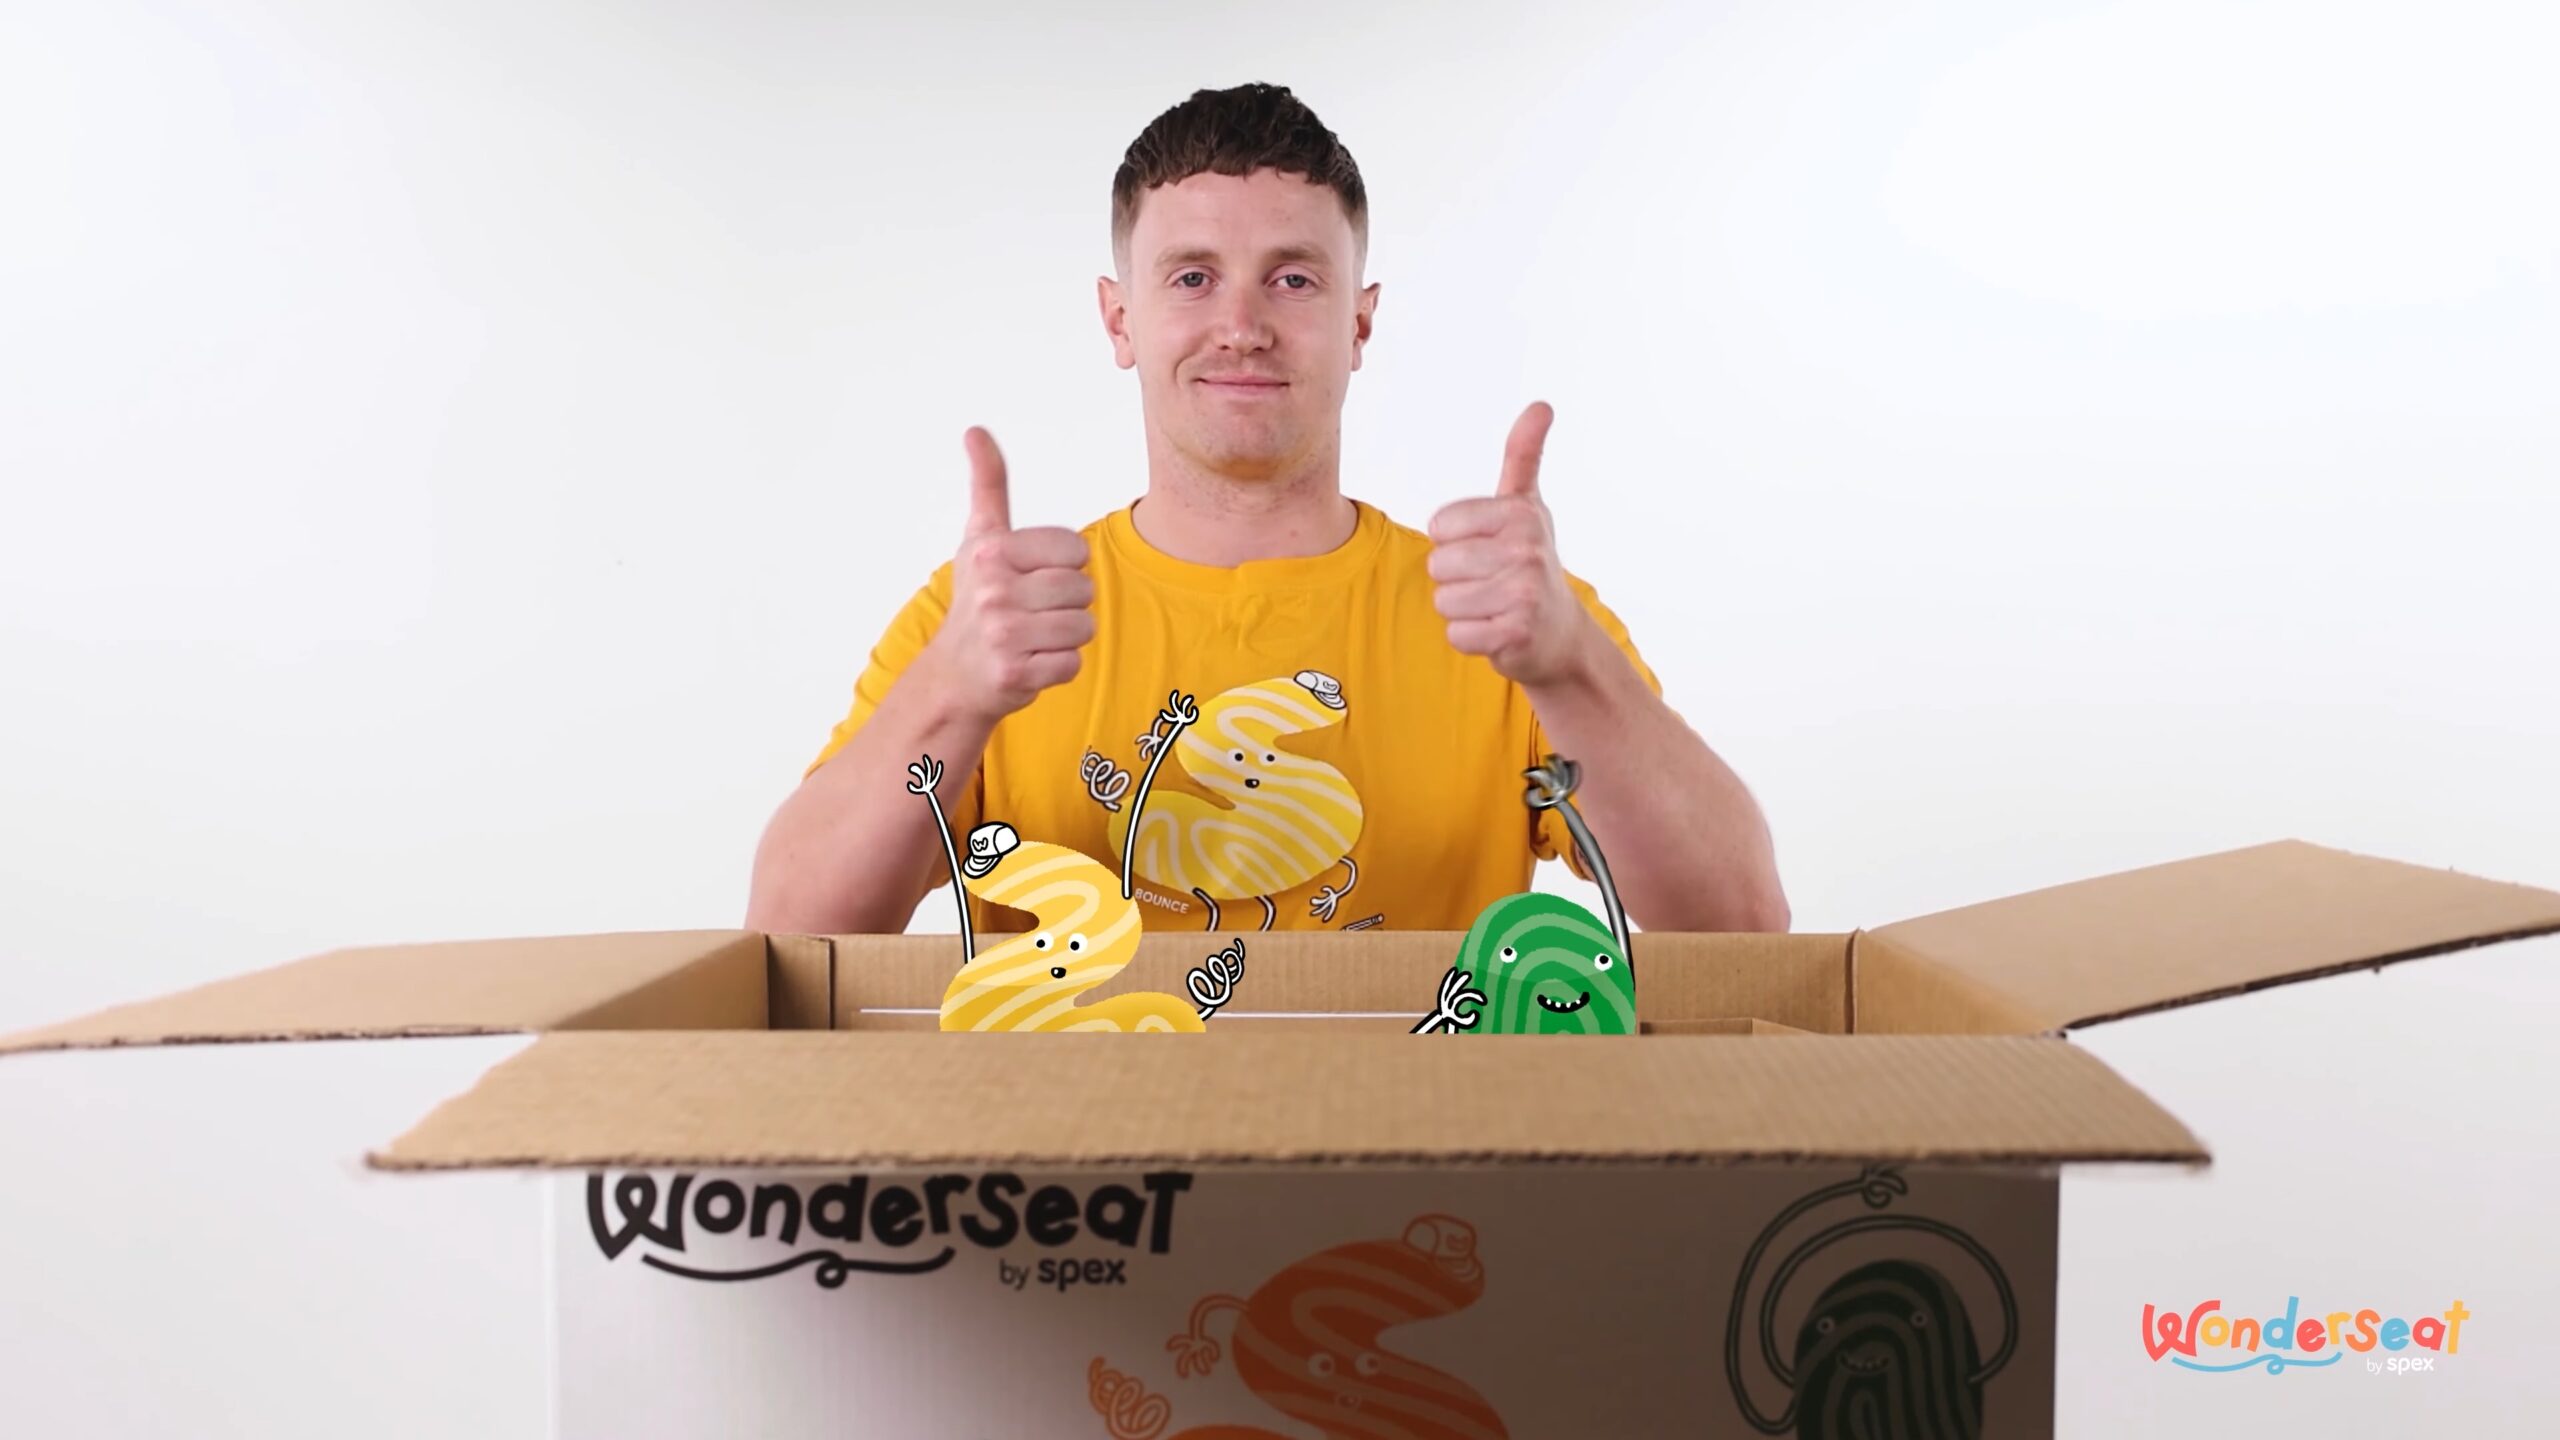 Man doing 'thumbs up' as he unboxes the Wonderseat characters